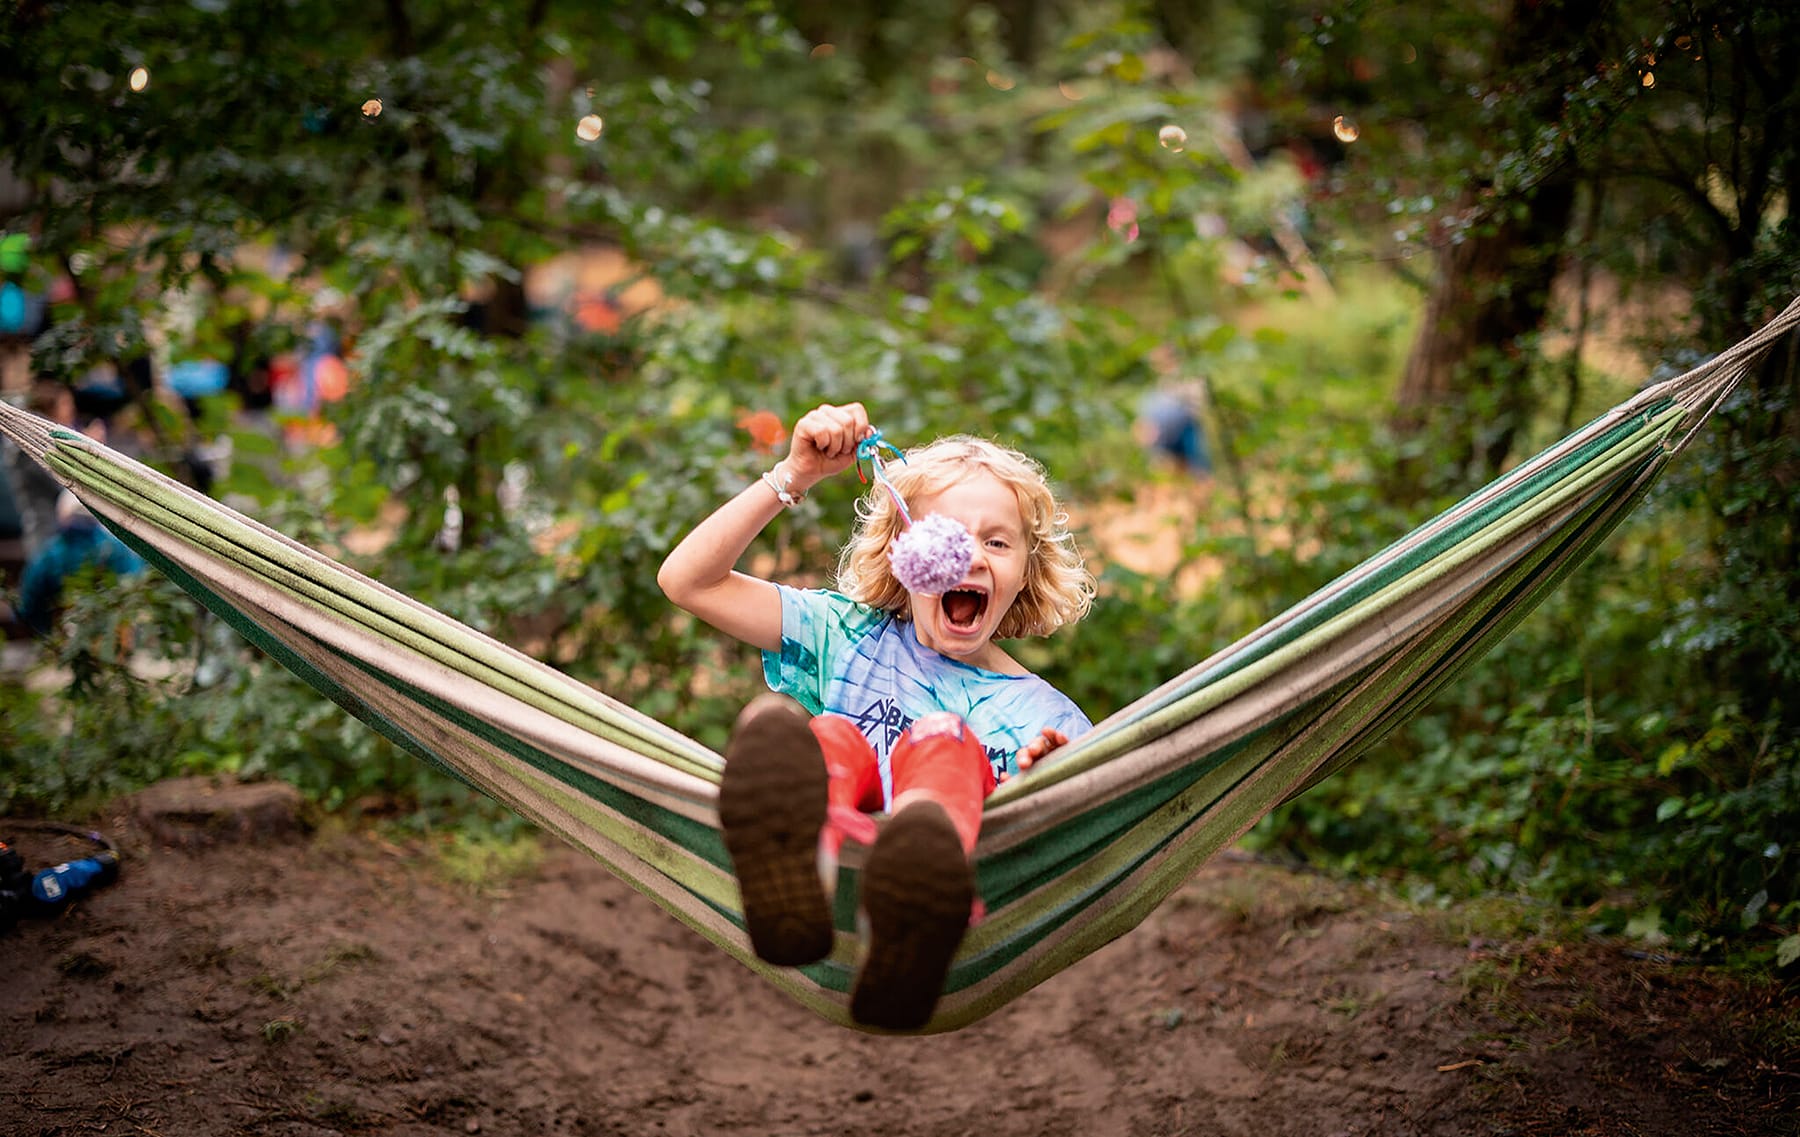 Photograph shows a young child at a festival, in a hammock holding a purple pompom